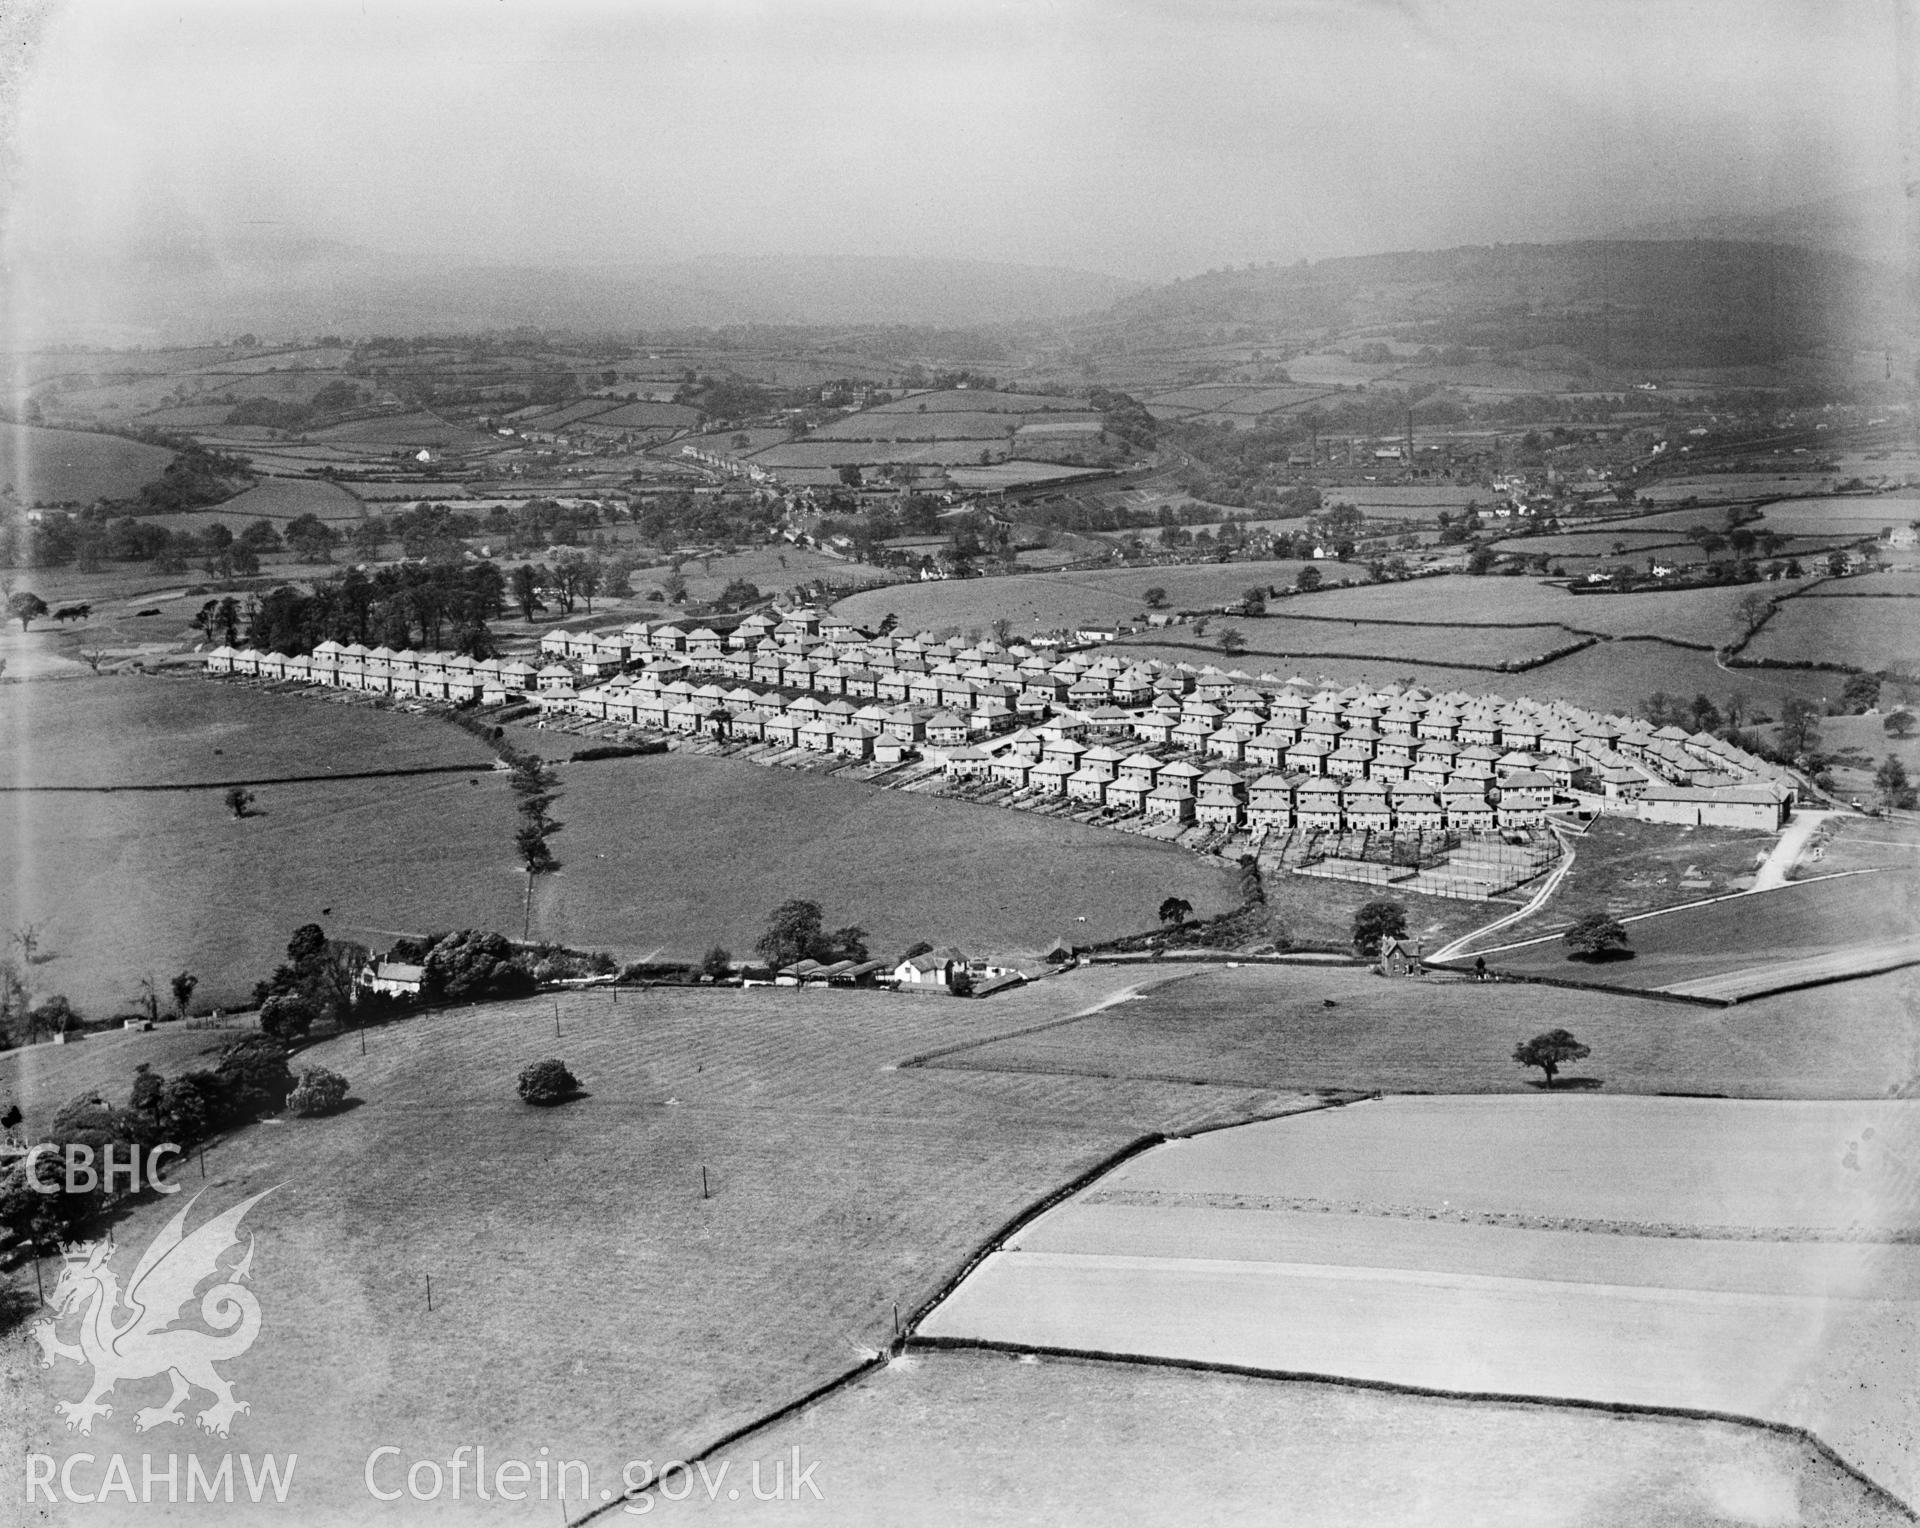 View of Gaer housing estate, Newport, oblique aerial view. 5?x4? black and white glass plate negative.